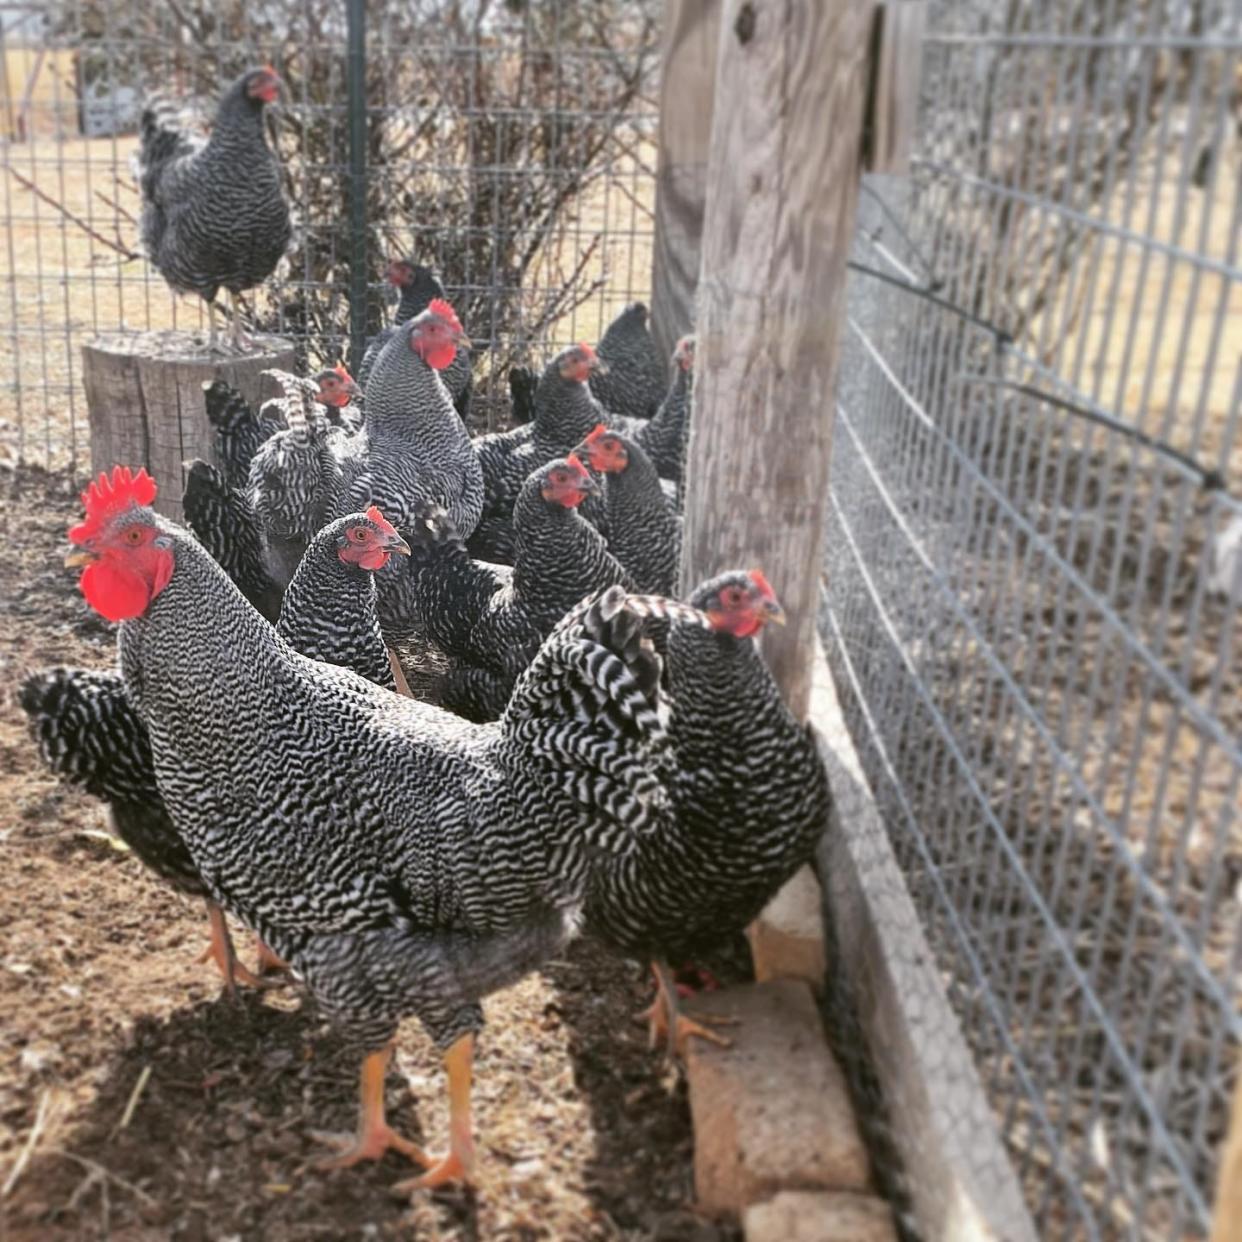 The Barred Plymouth Rocks at Short Trip Farm TX in Idalou are expected to start laying eggs in February.